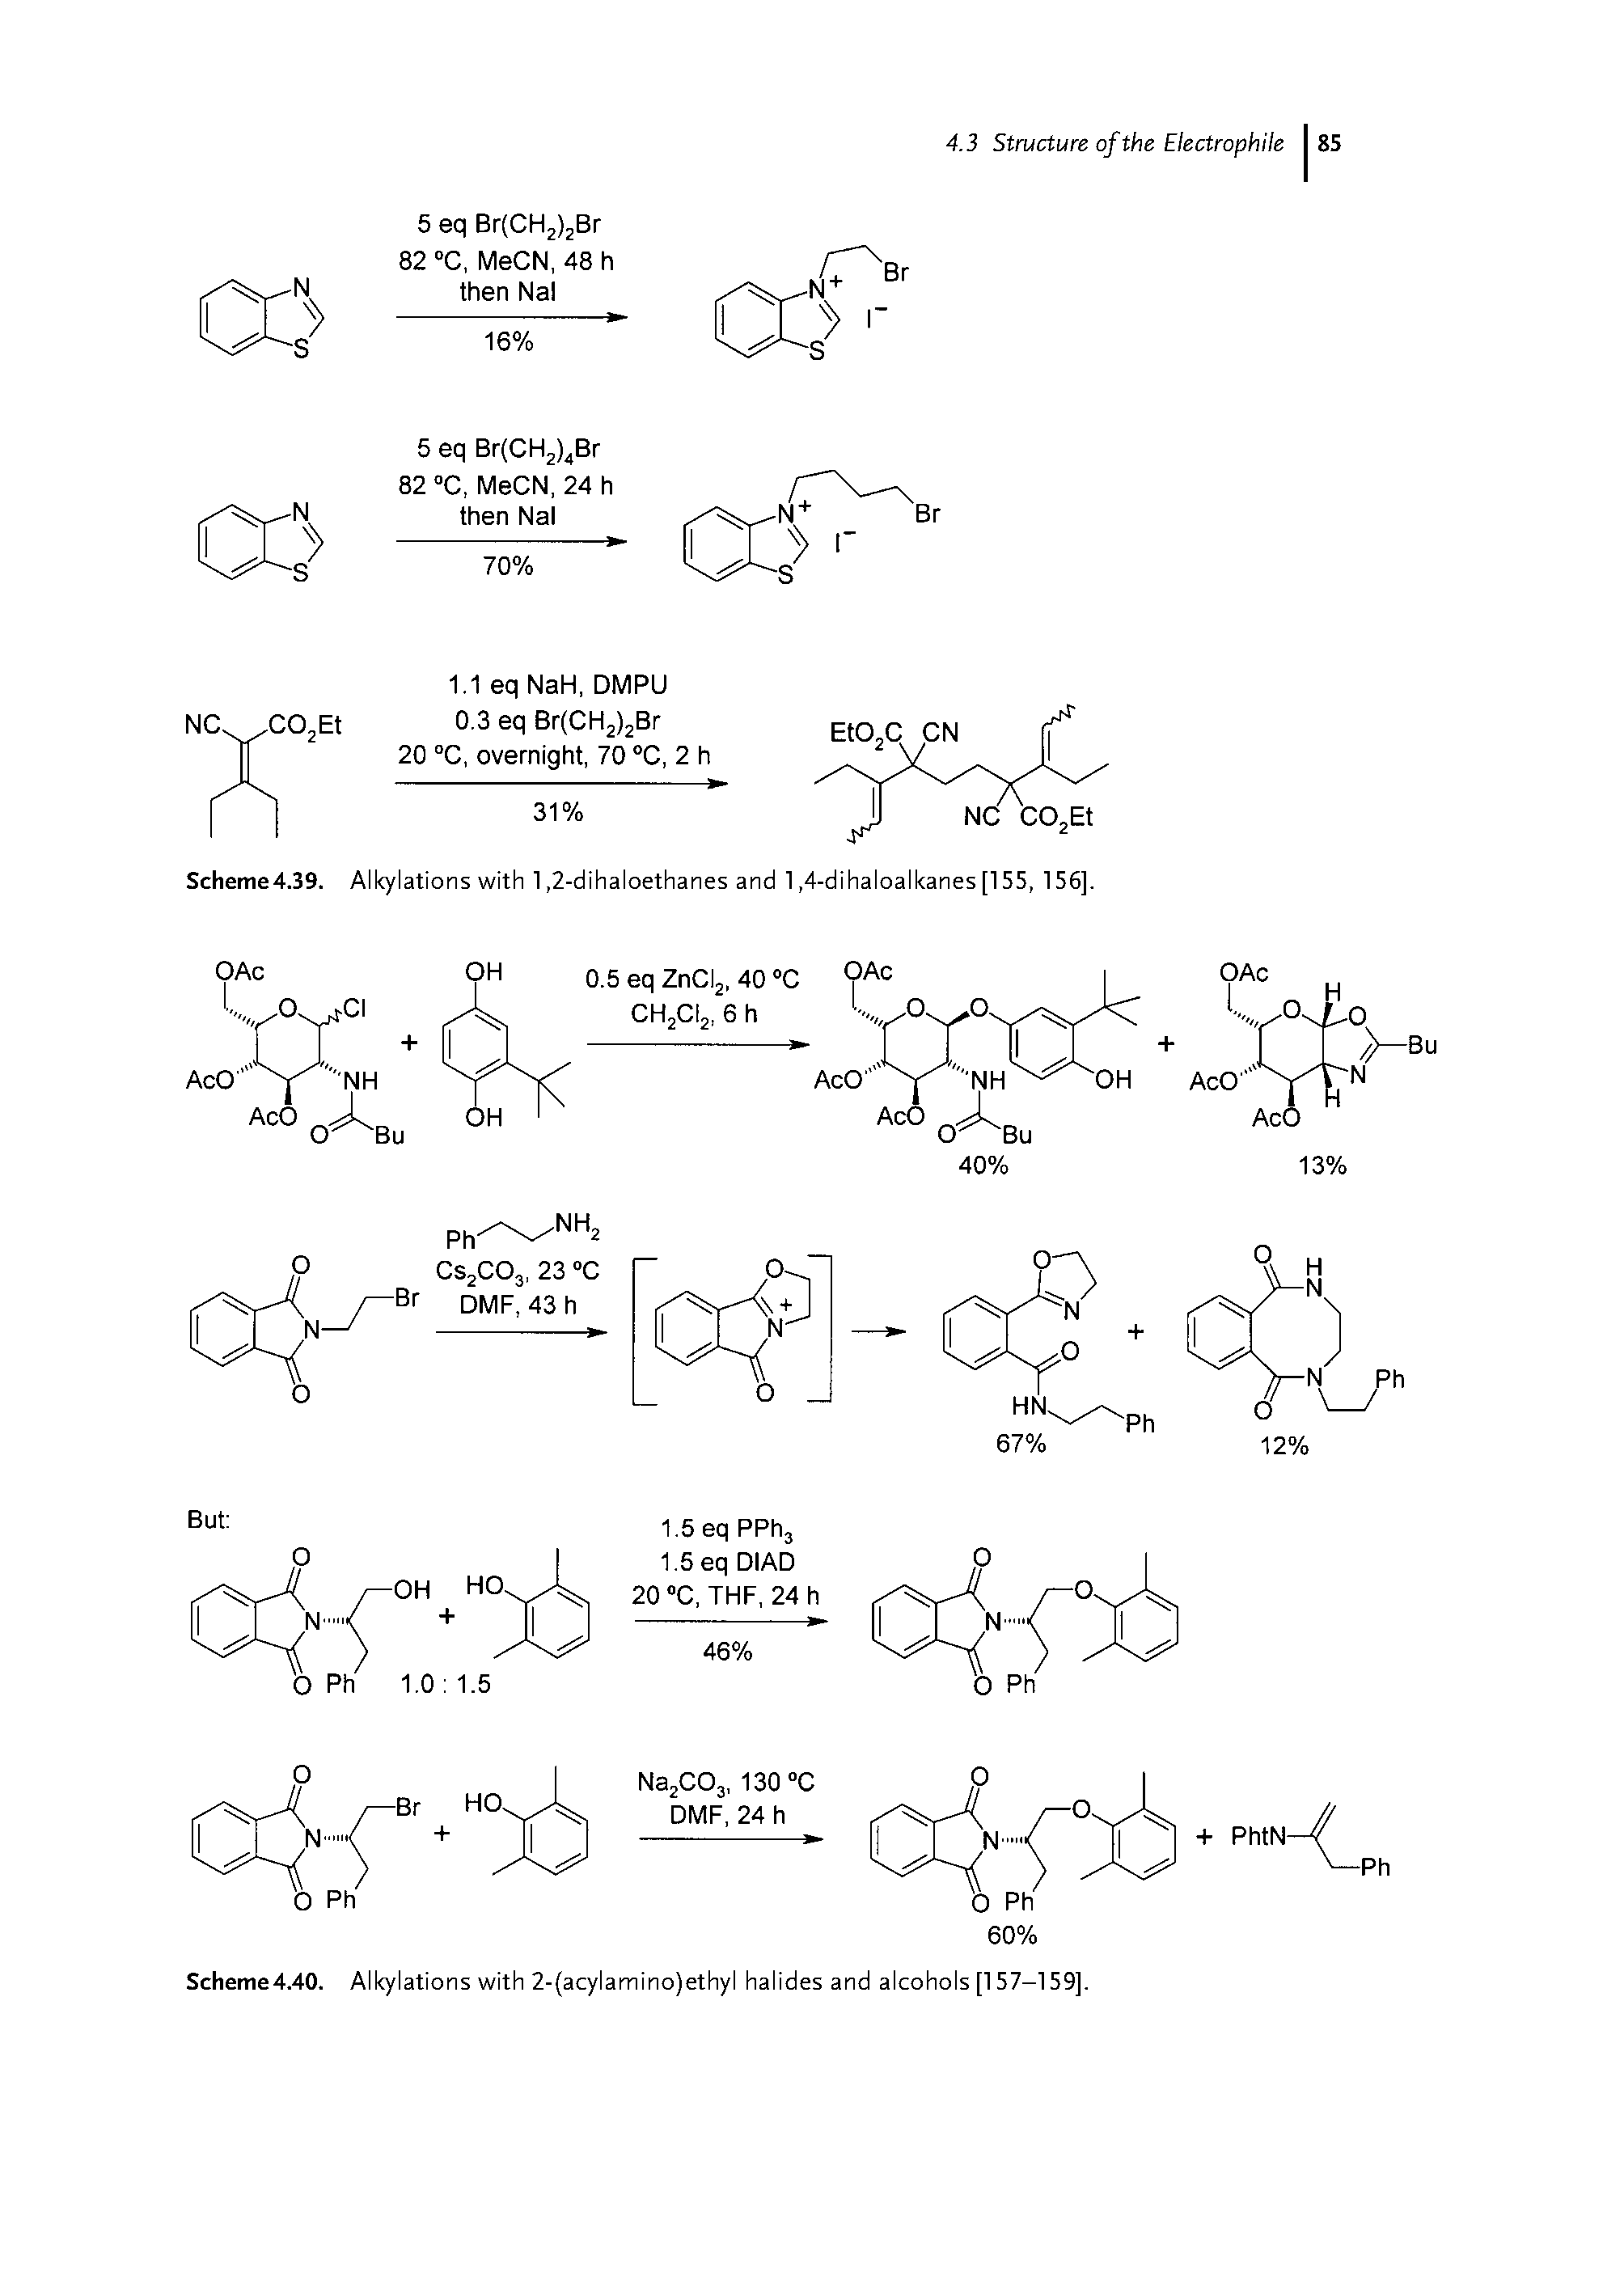 Scheme4.40. Alkylations with 2-(acylamino)ethyl halides and alcohols [157-159],...